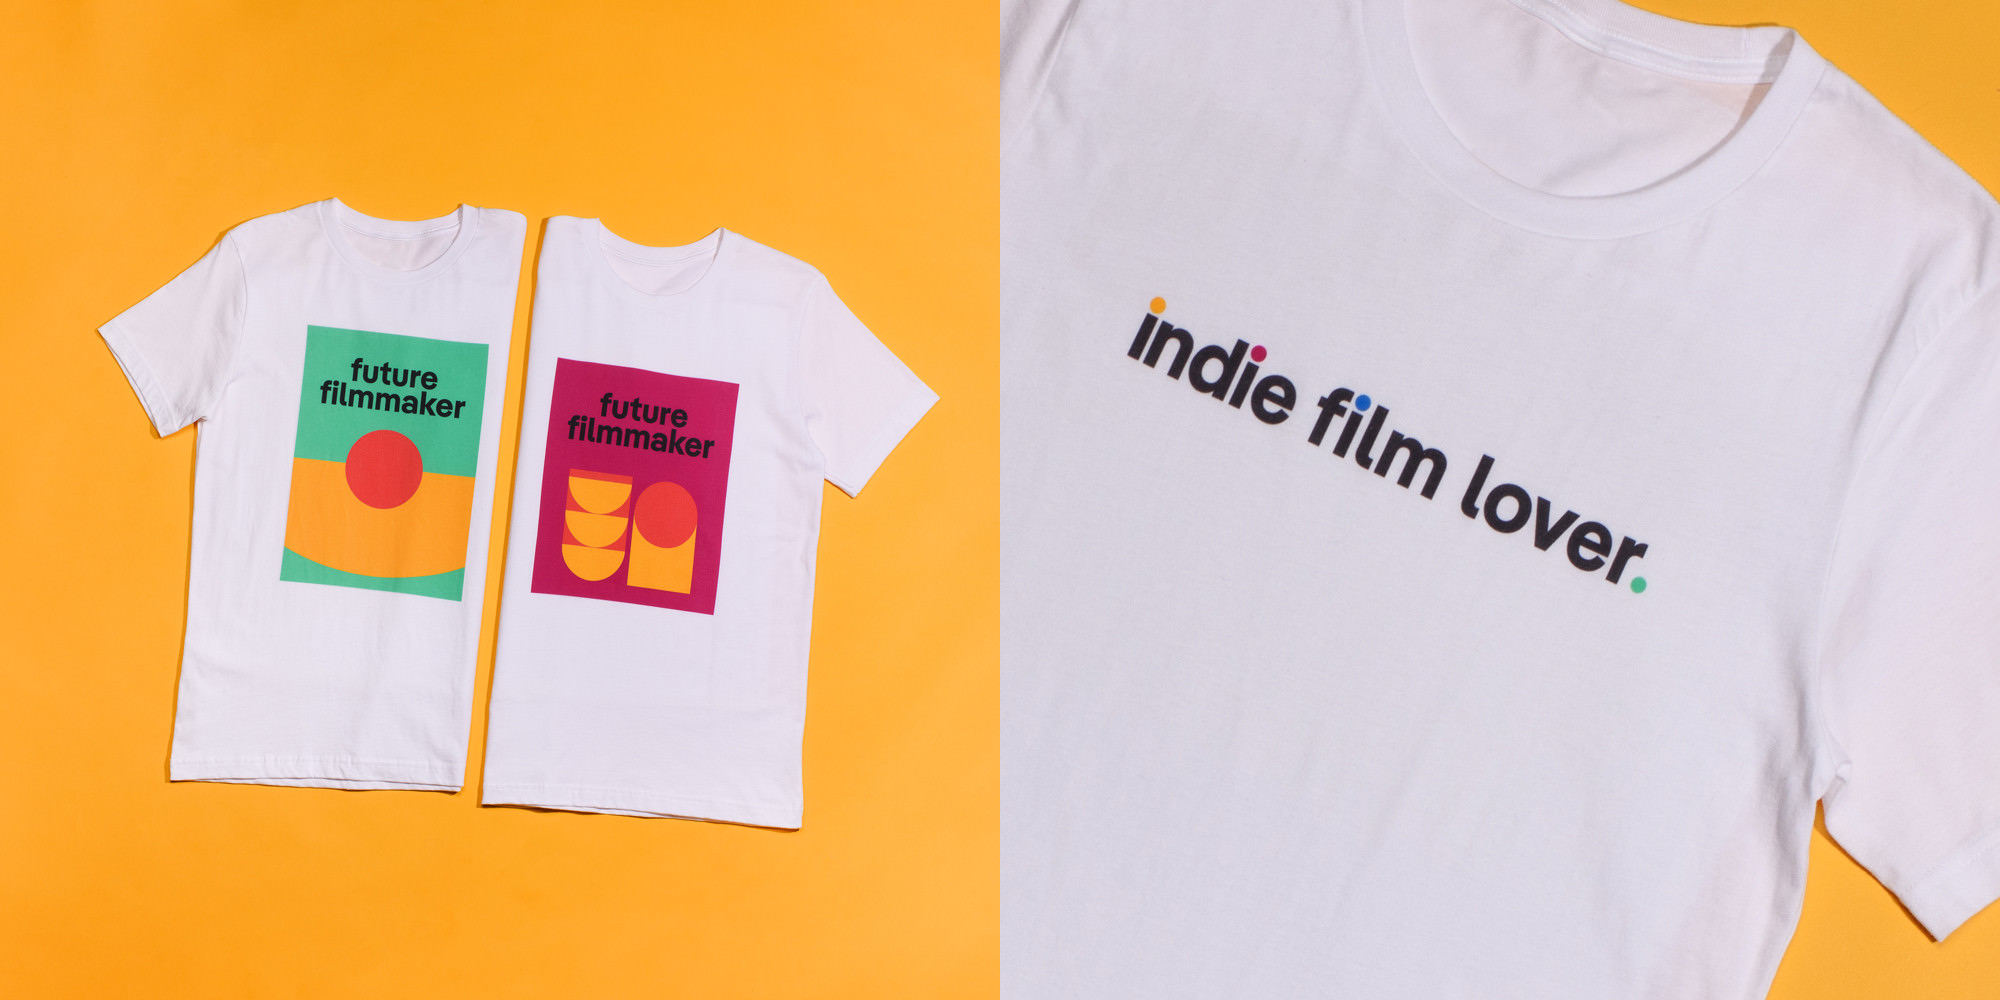 Promoting young talent and customer loyalty: The Sundance Festival Merch Shop offers a range of T-shirts, all designed with the house colors and font